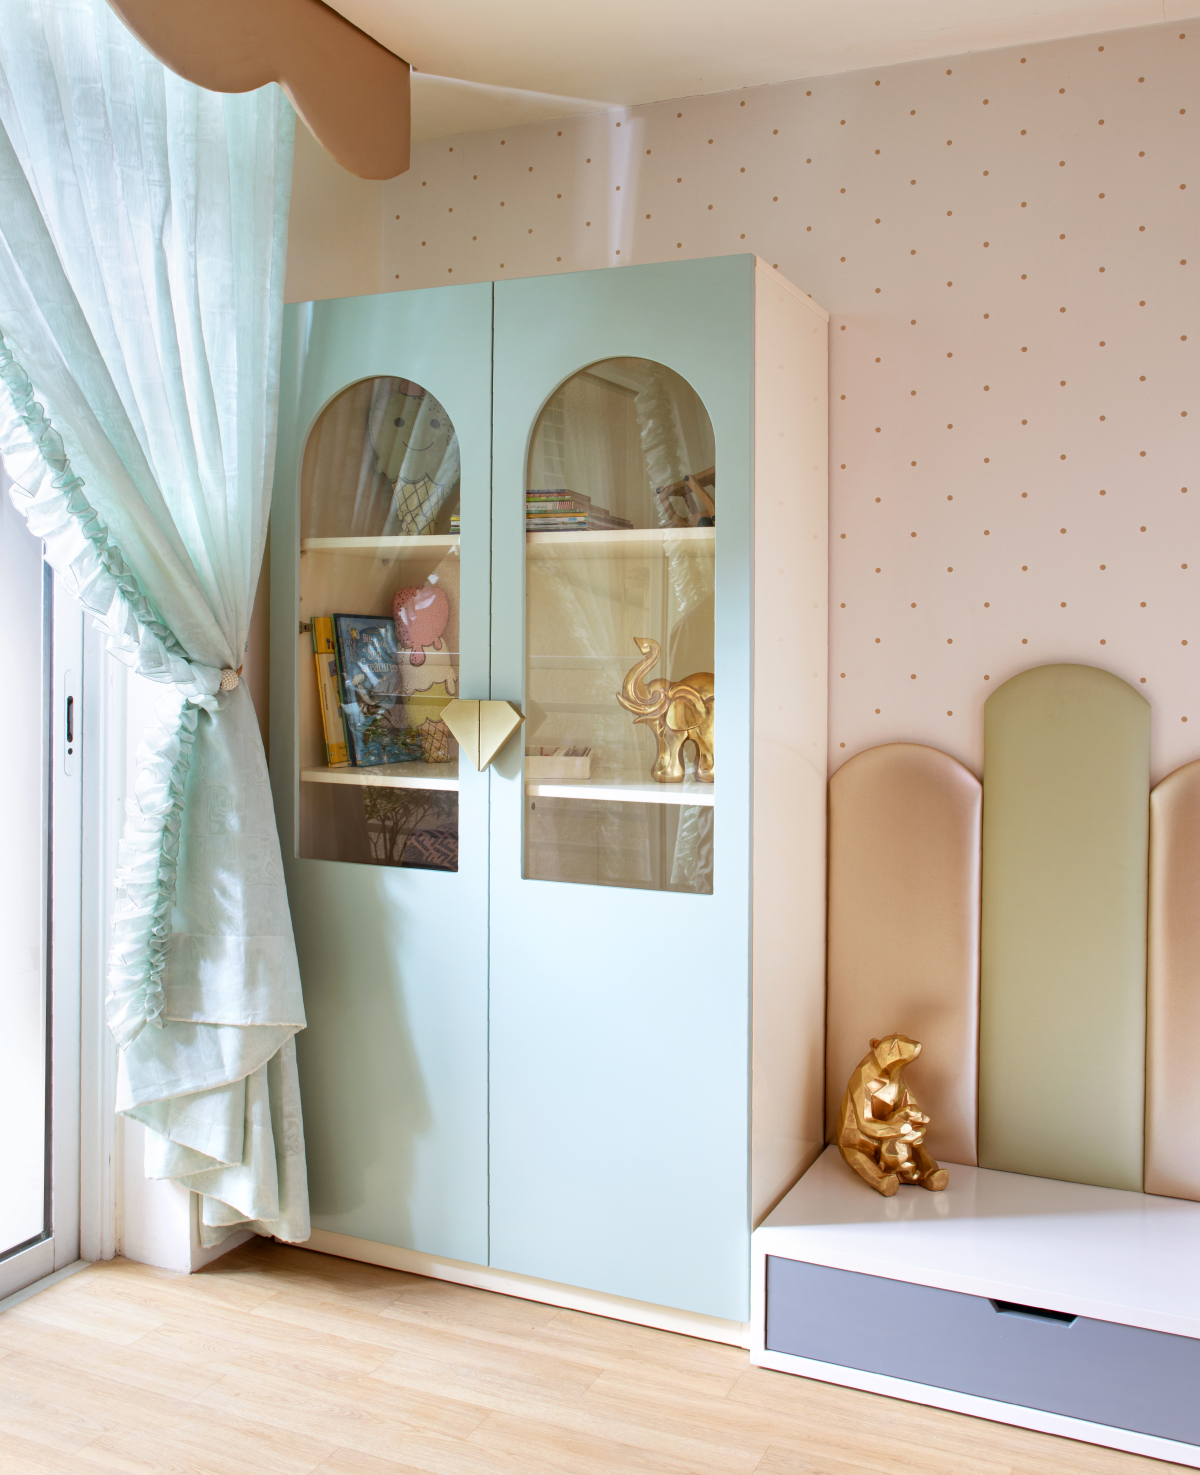 Thinkcutieful designs a playroom for two sisters 5